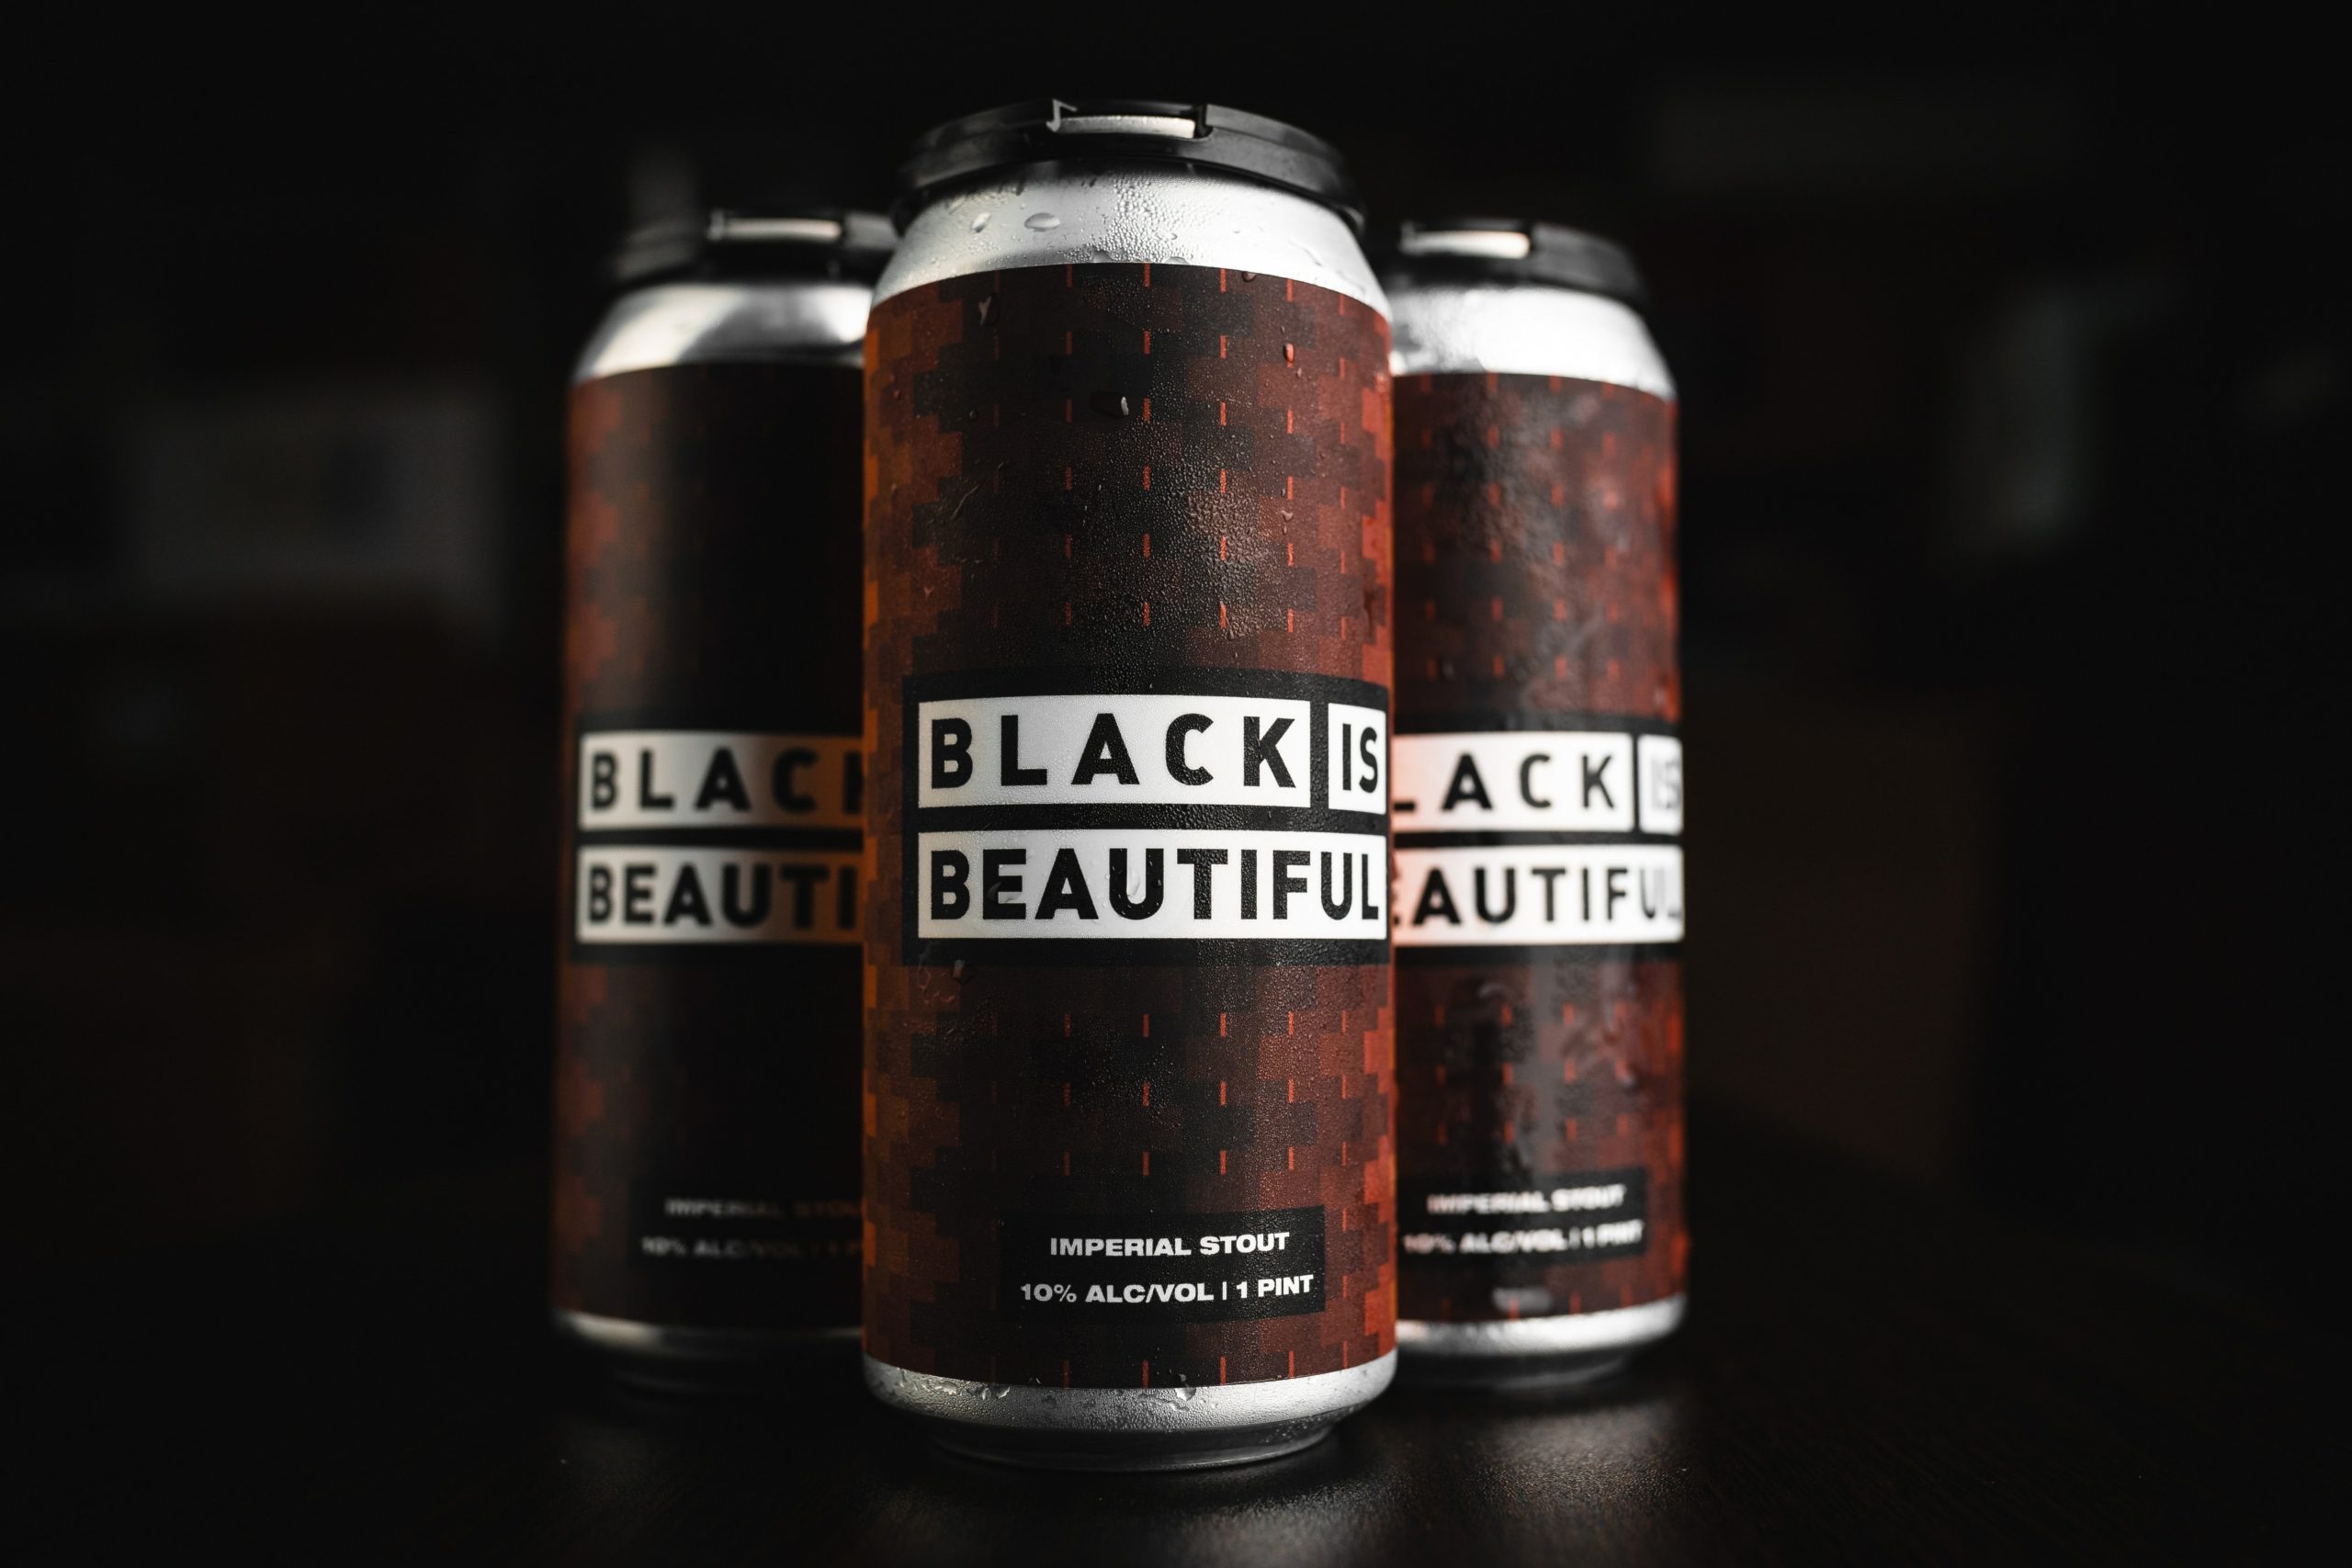 Three frosty aluminum beer cans on which are written the words "Black is Beautiful Imperial Stout 10% Alc/Vol". The cans are set against a black background.